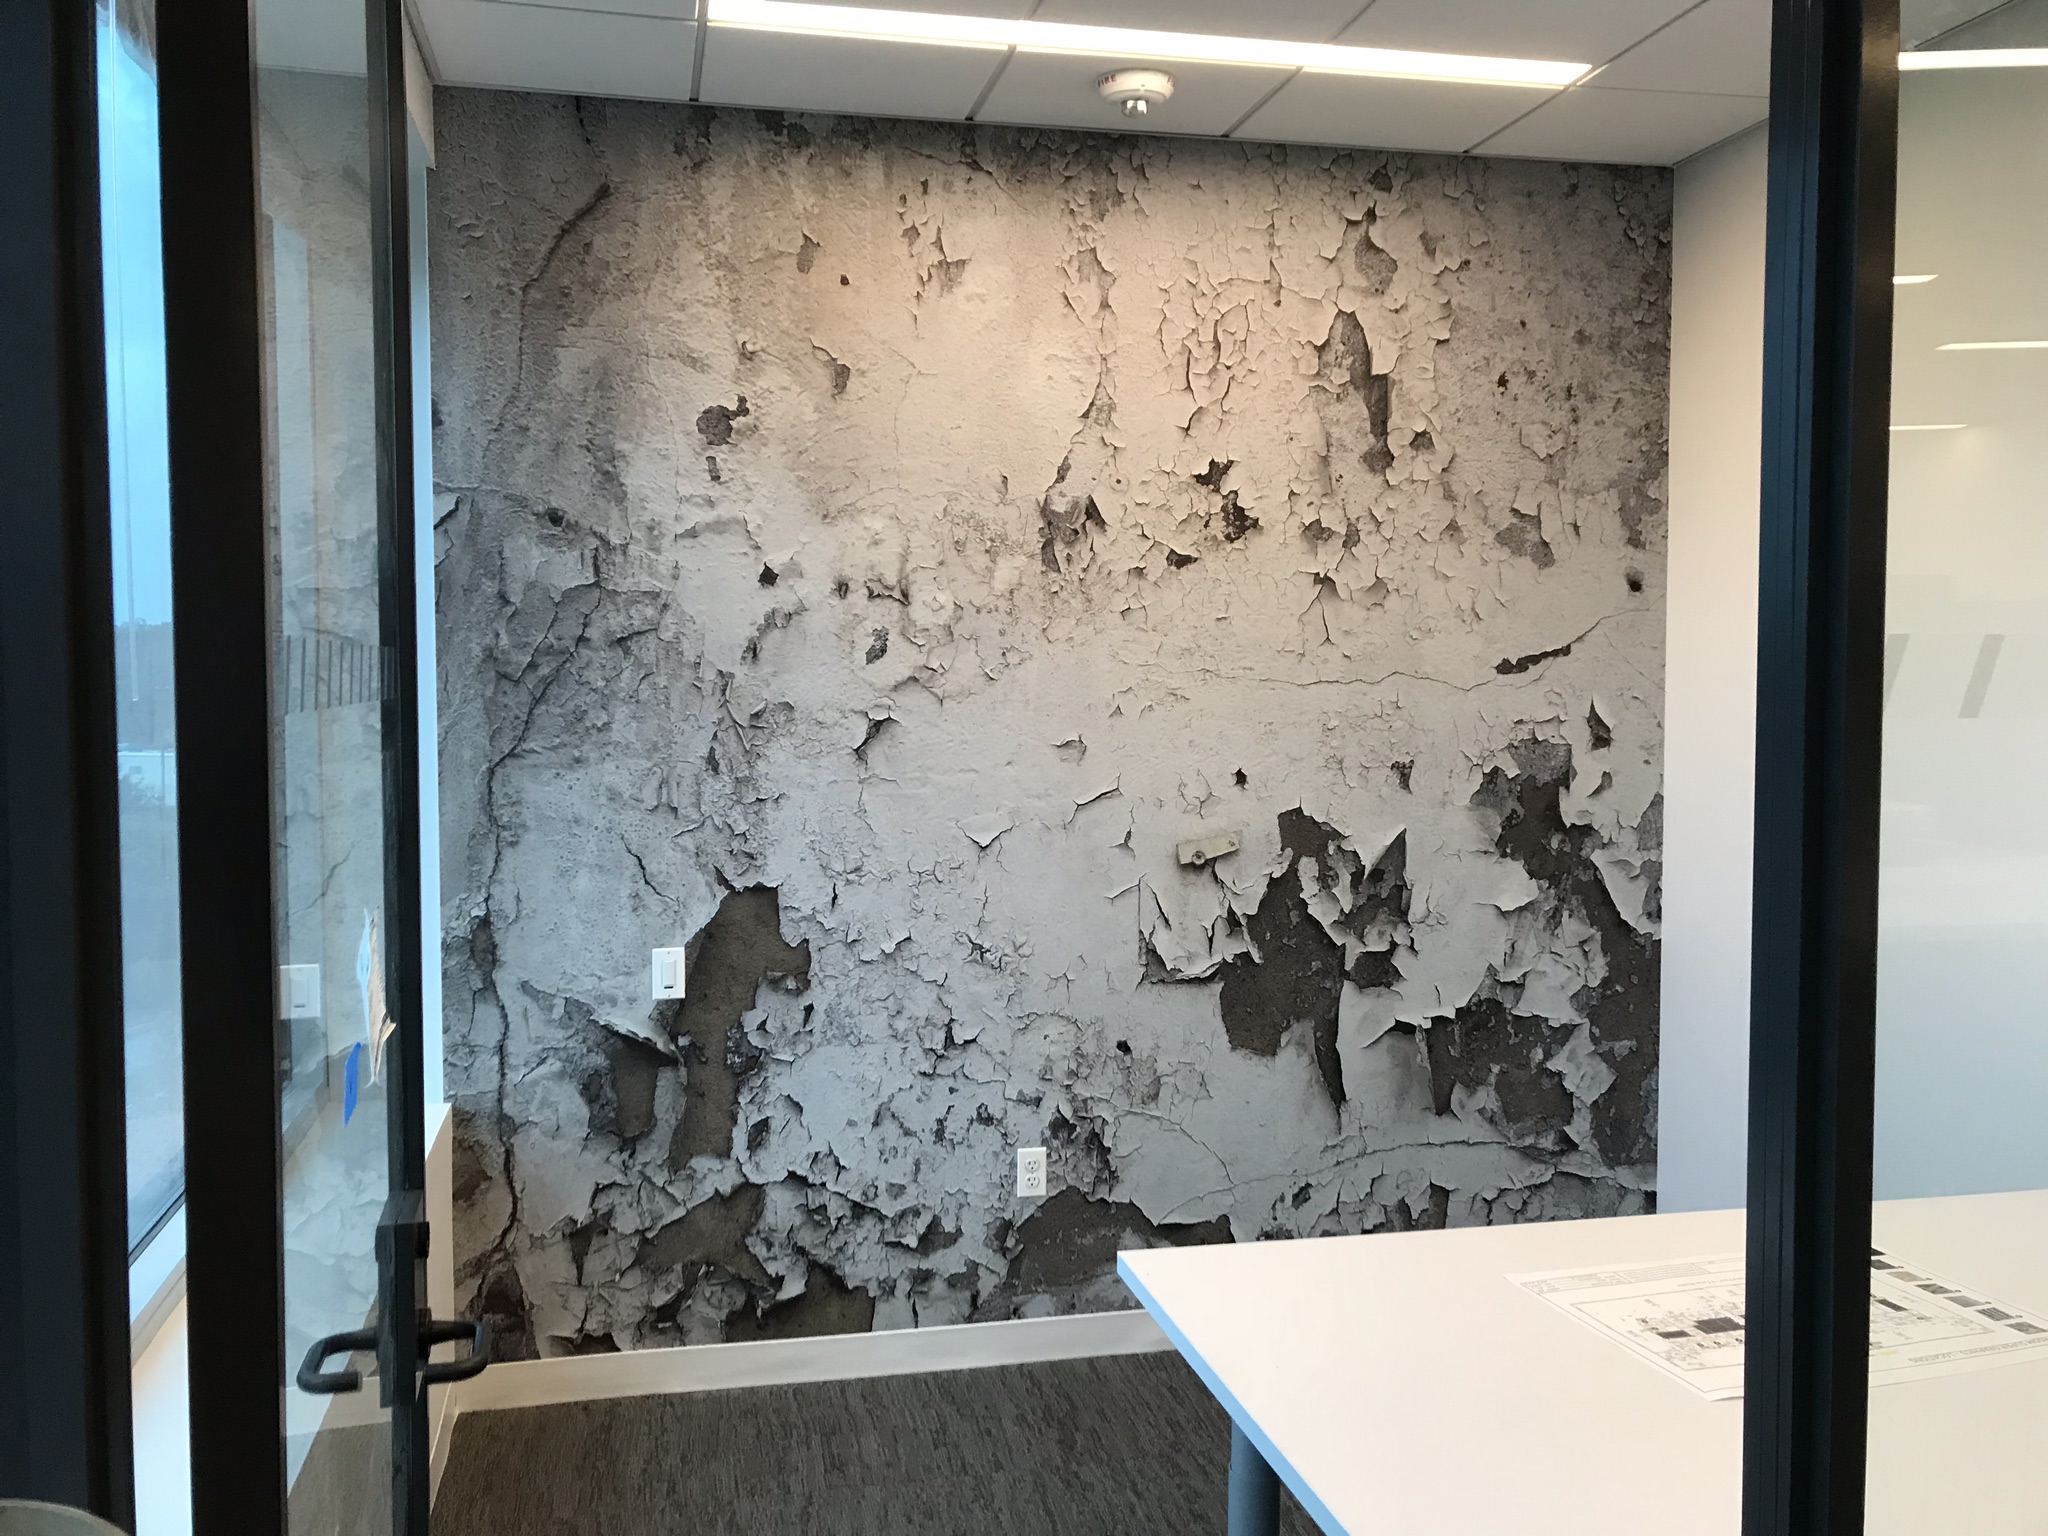 Wall mural of paint chipping off of a wall in an office space created by SpeedPro 